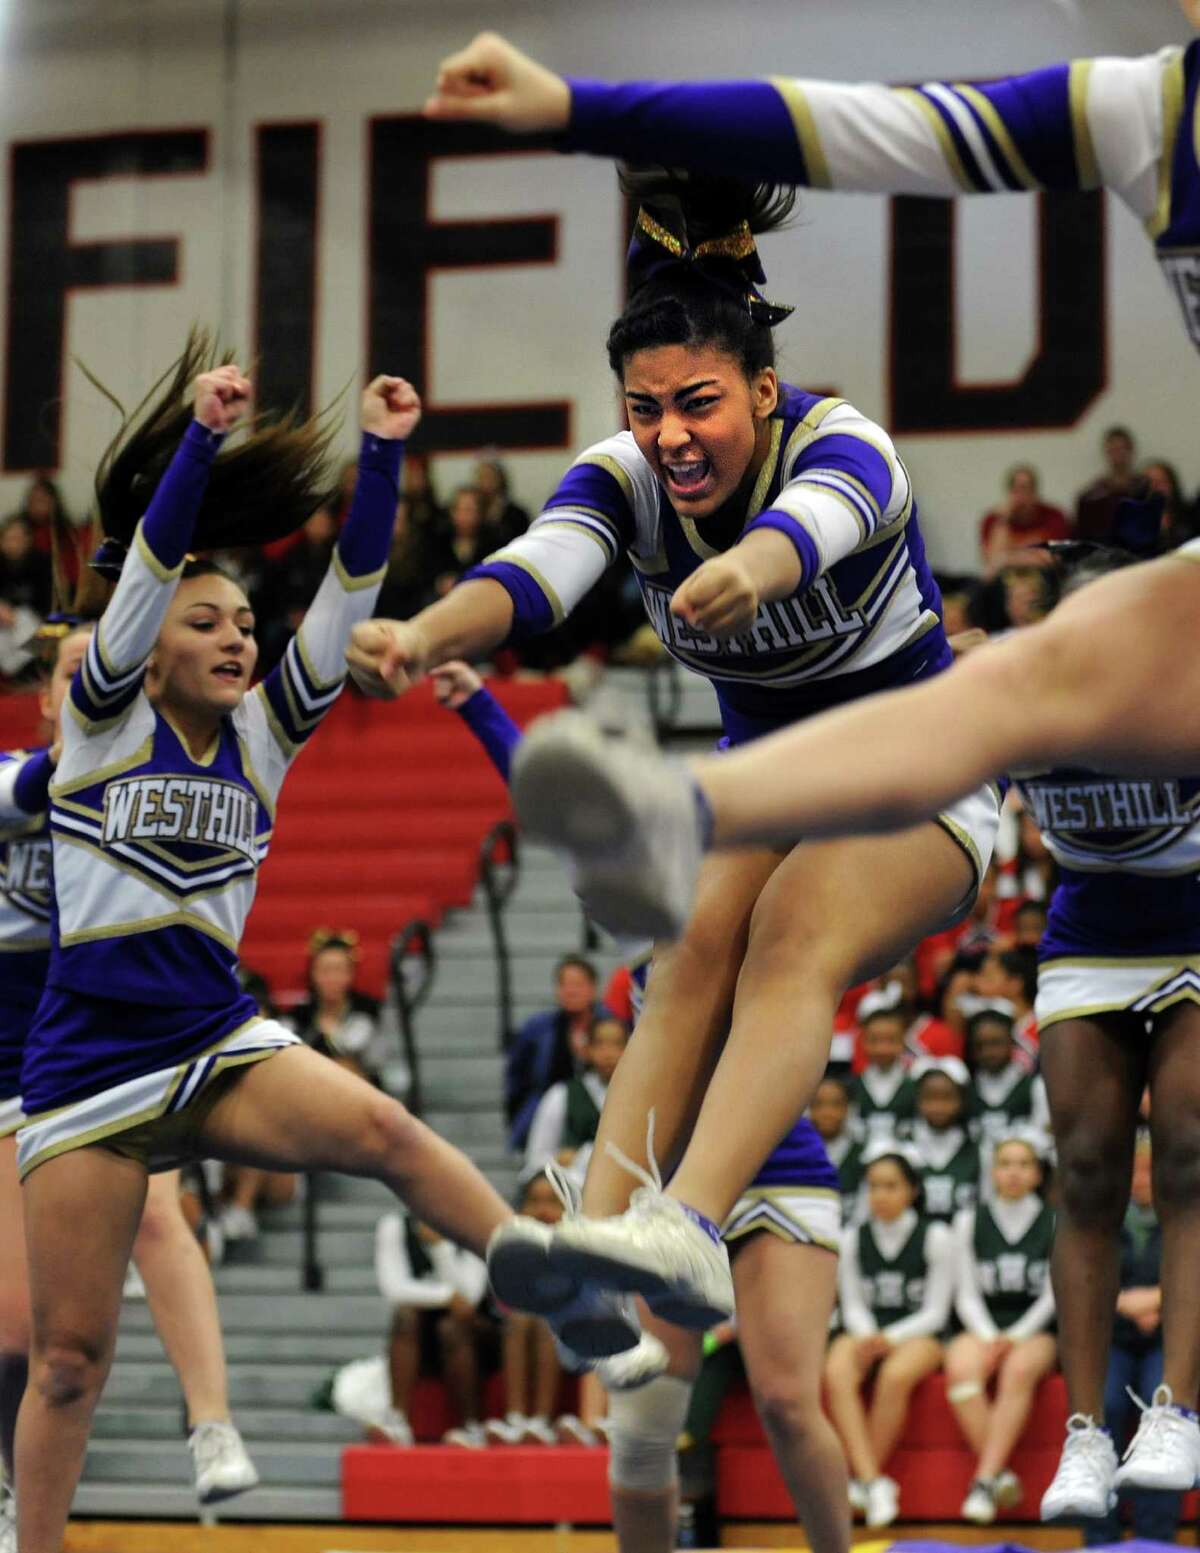 Westhill's Moriah Bass competes with her team during the FCIAC cheerleading championships Saturday, Feb. 2, 2013 at Fairfield Warde High School in Fairfield, Conn.